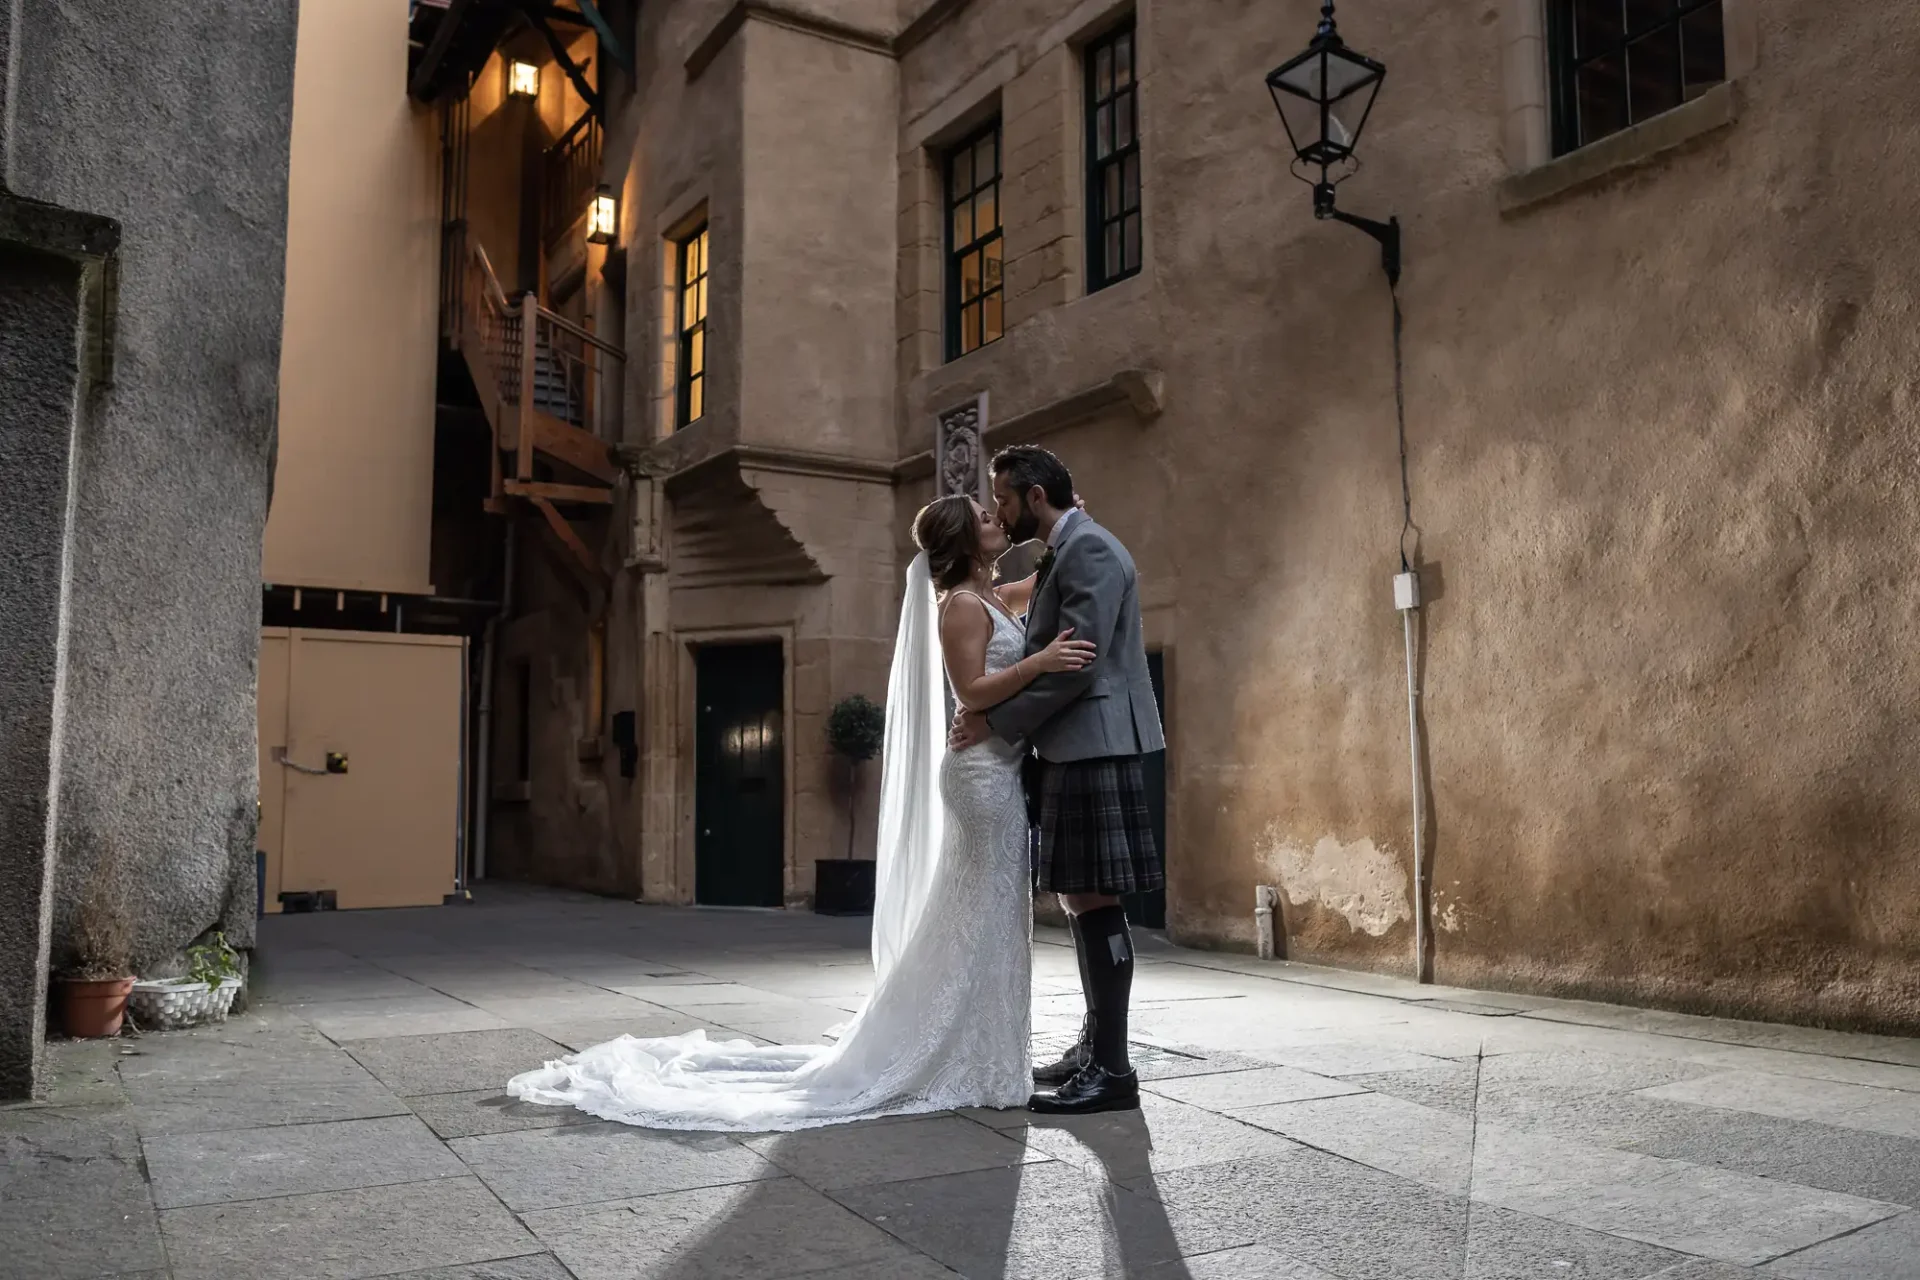 Bride and groom kissing in a sunlit alley, the bride in a long white dress and the groom in a tartan kilt.